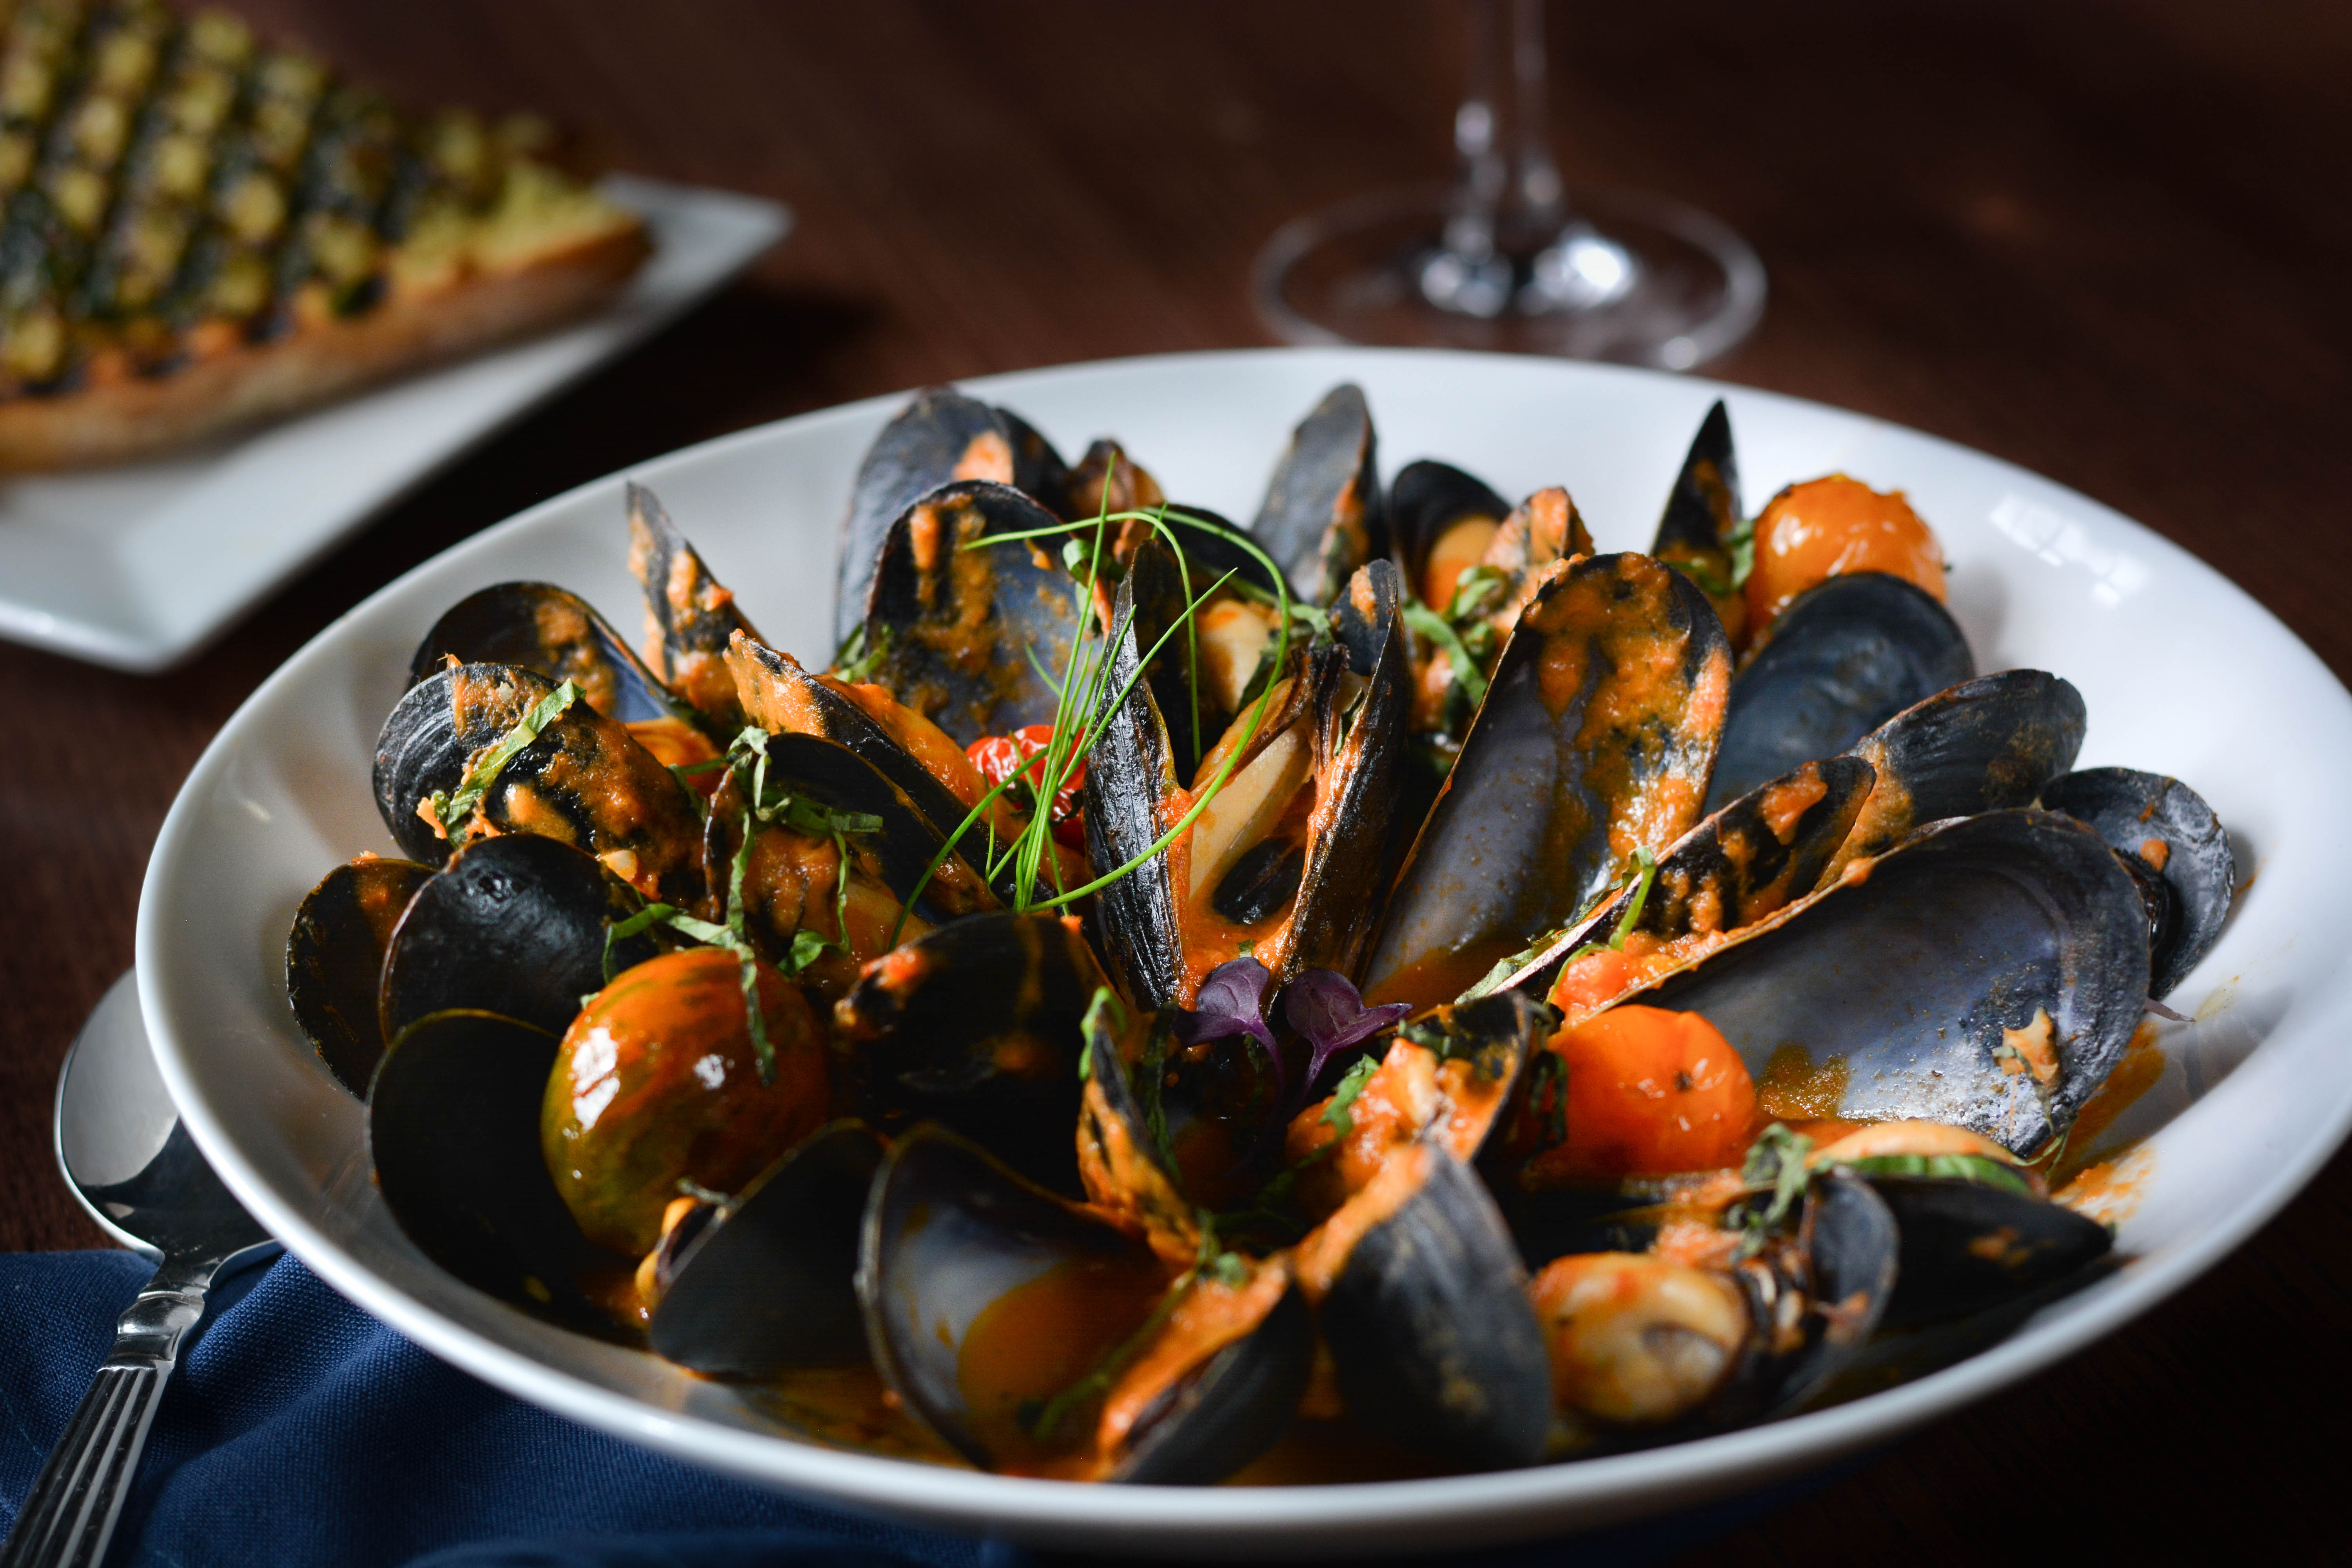 Jag's has Mussels, scallops and more seafood options are available at Jag's all through the Lenten season